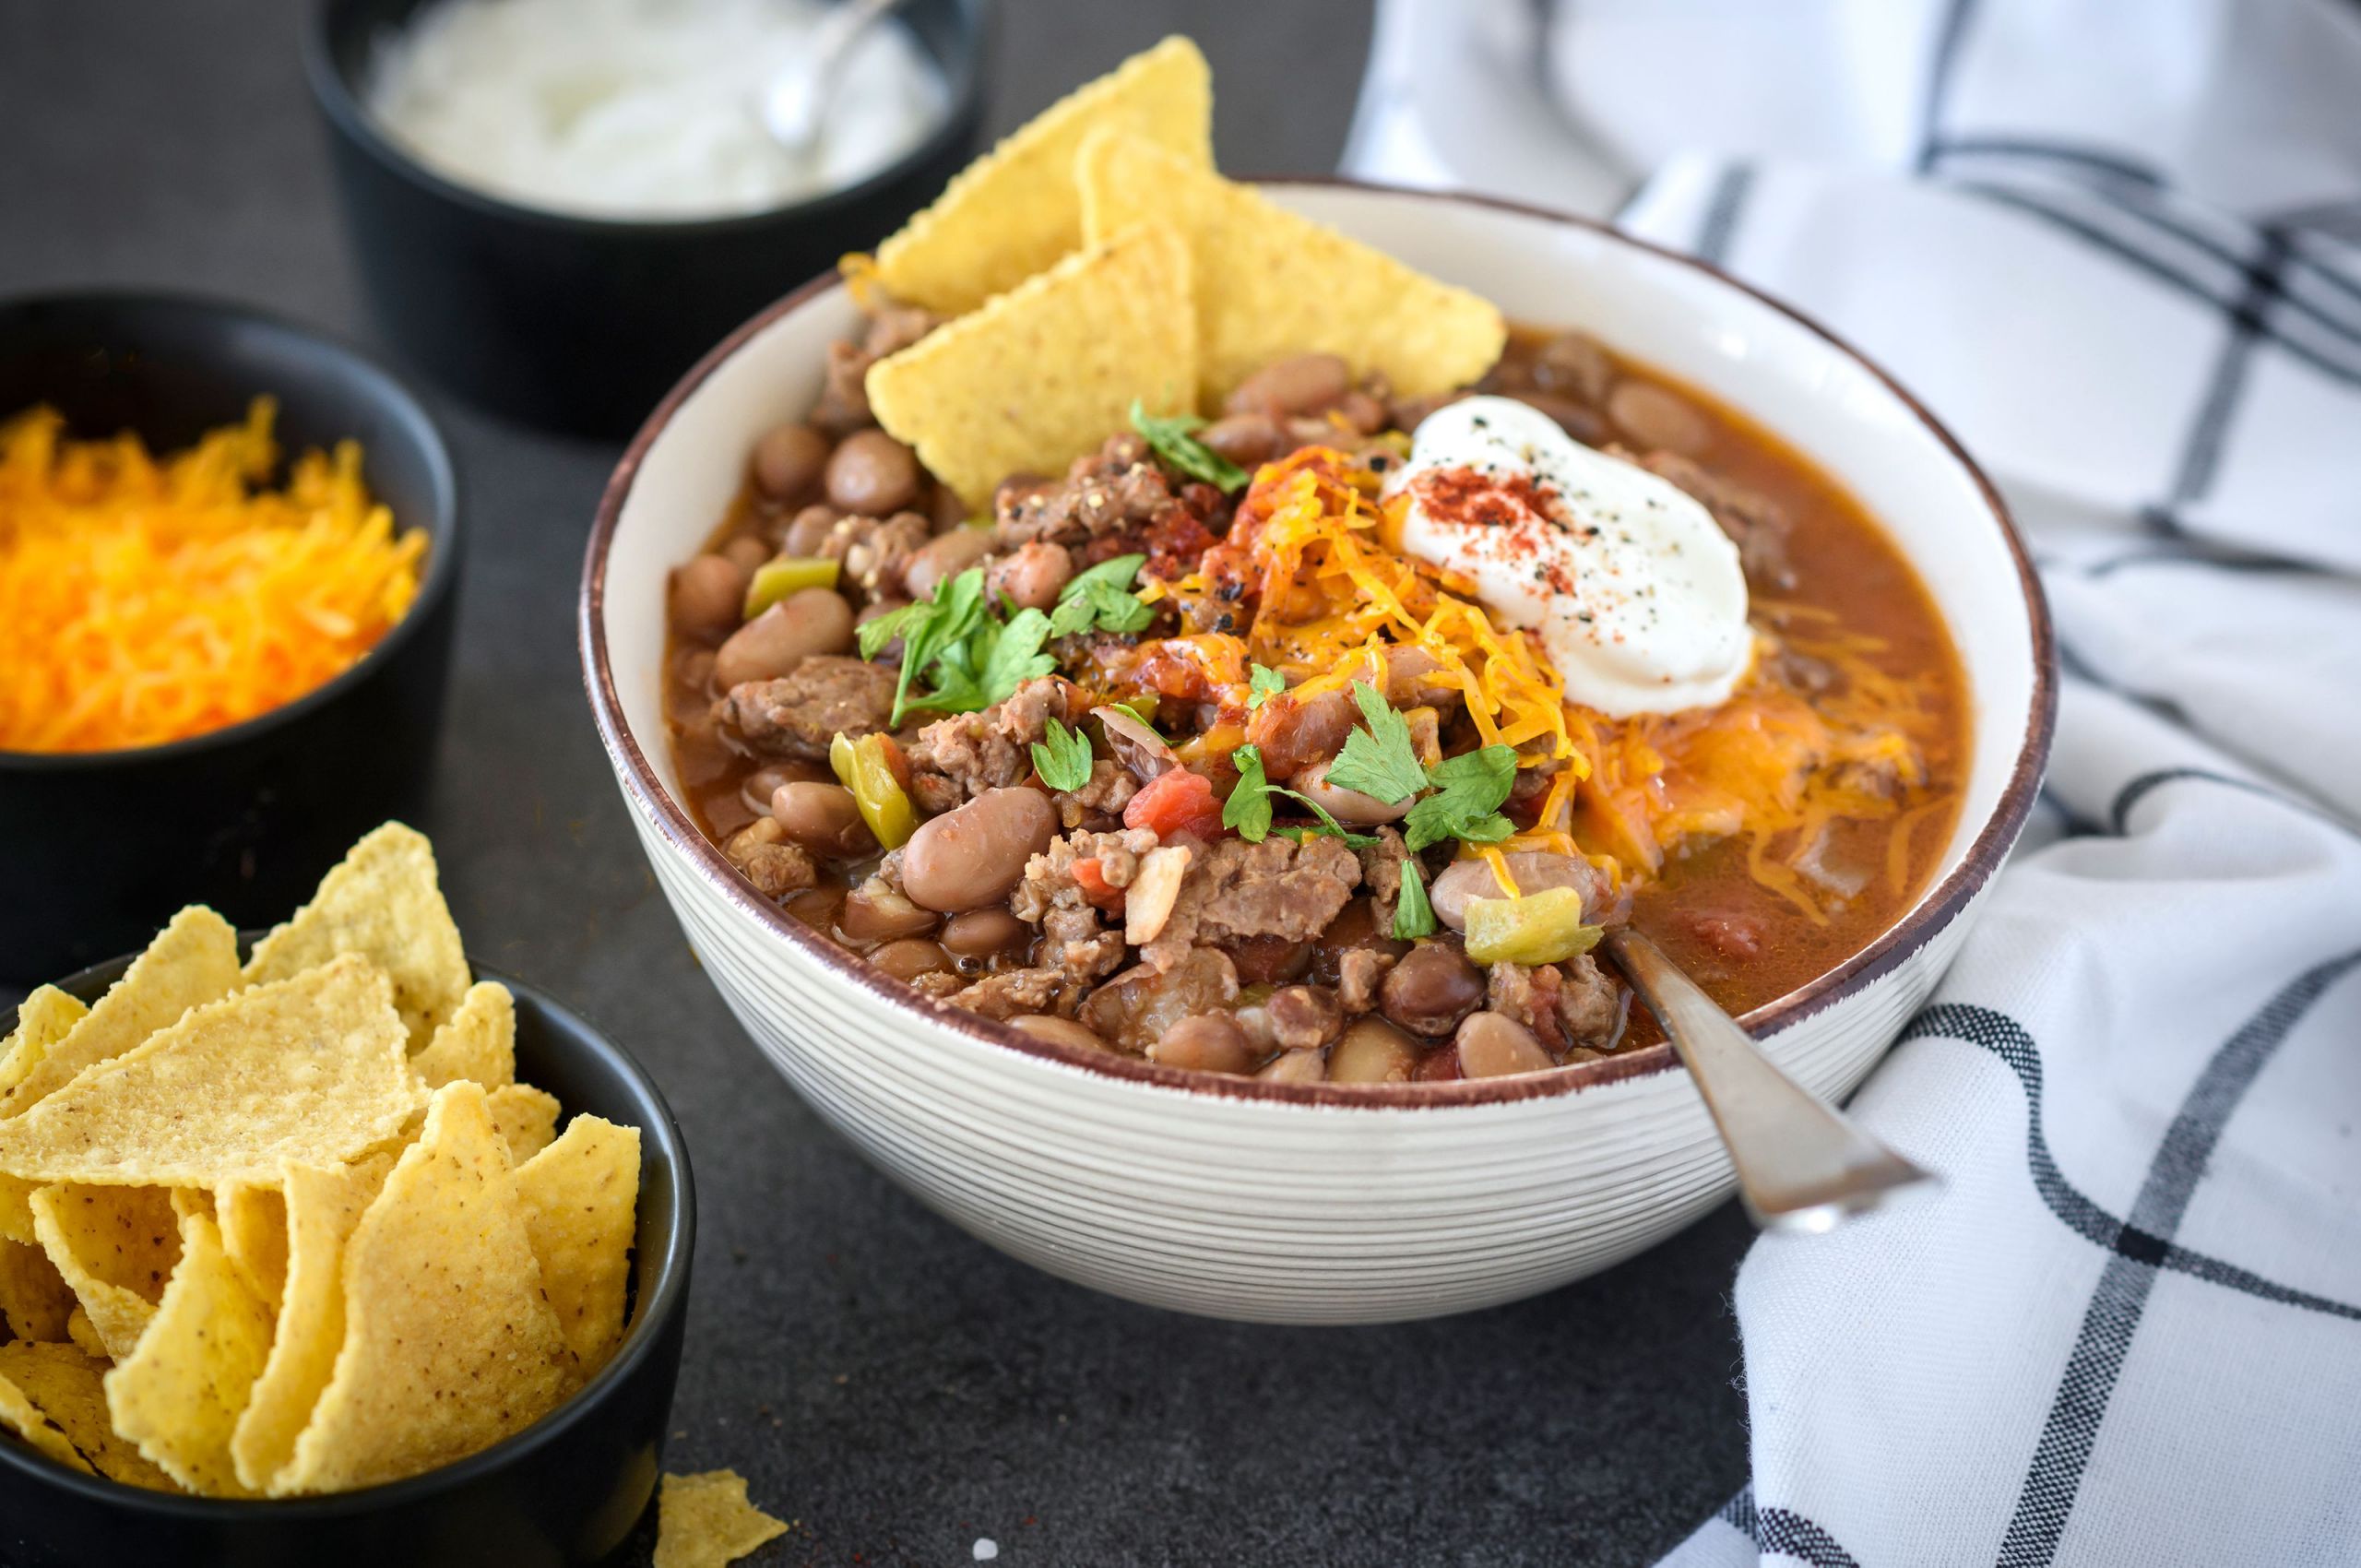 Pinto Beans And Ground Beef Recipe Slow Cooker
 Slow Cooker Pinto Bean Chili With Ground Beef Recipe